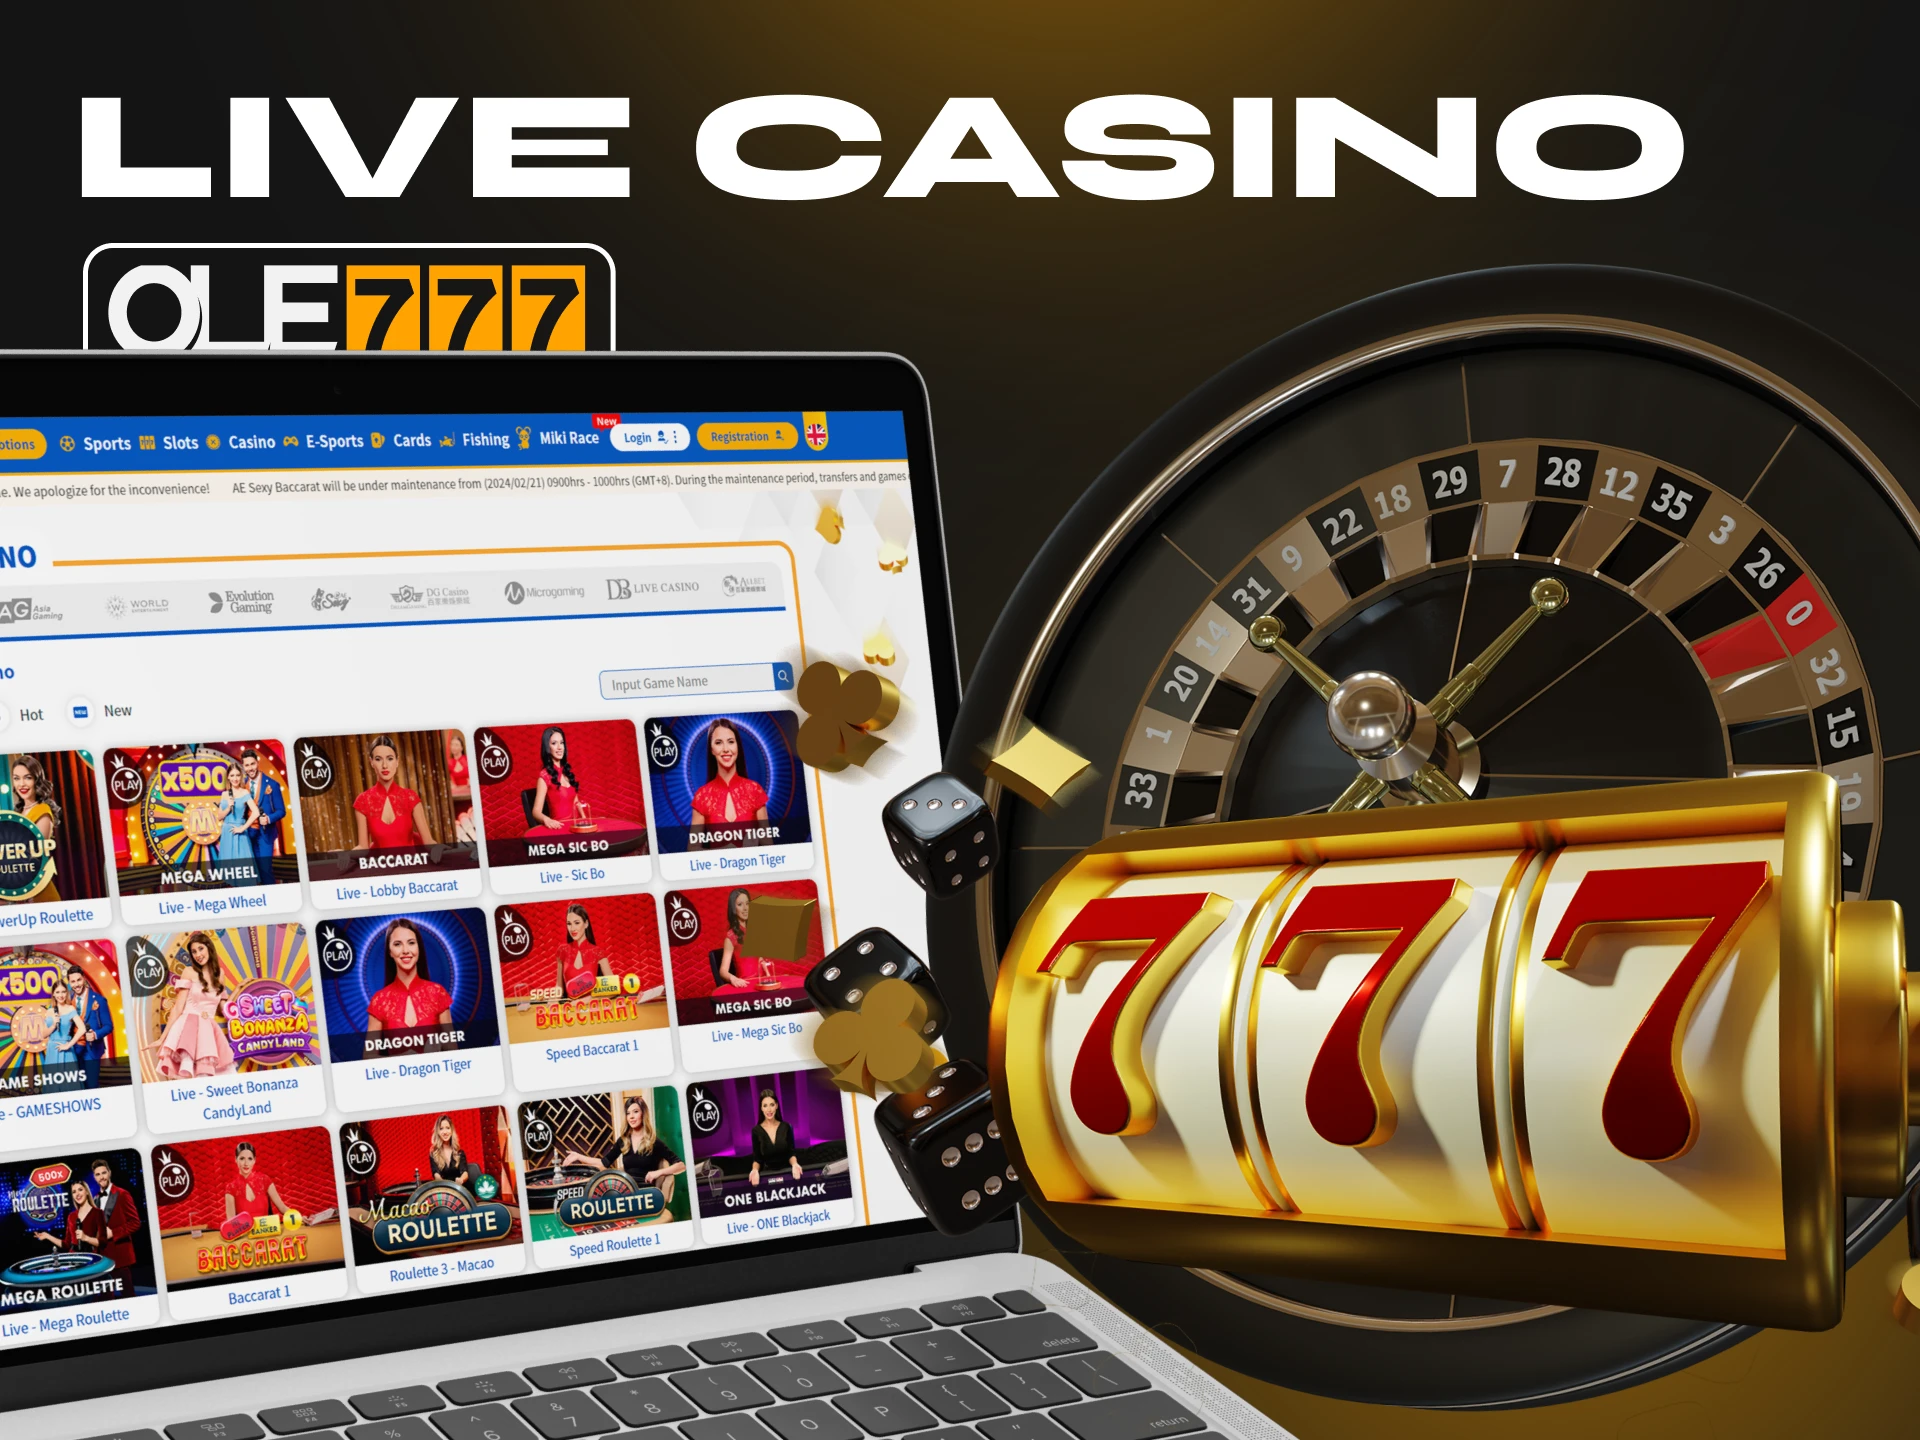 Ole777 Casino has a large section of live casino games.